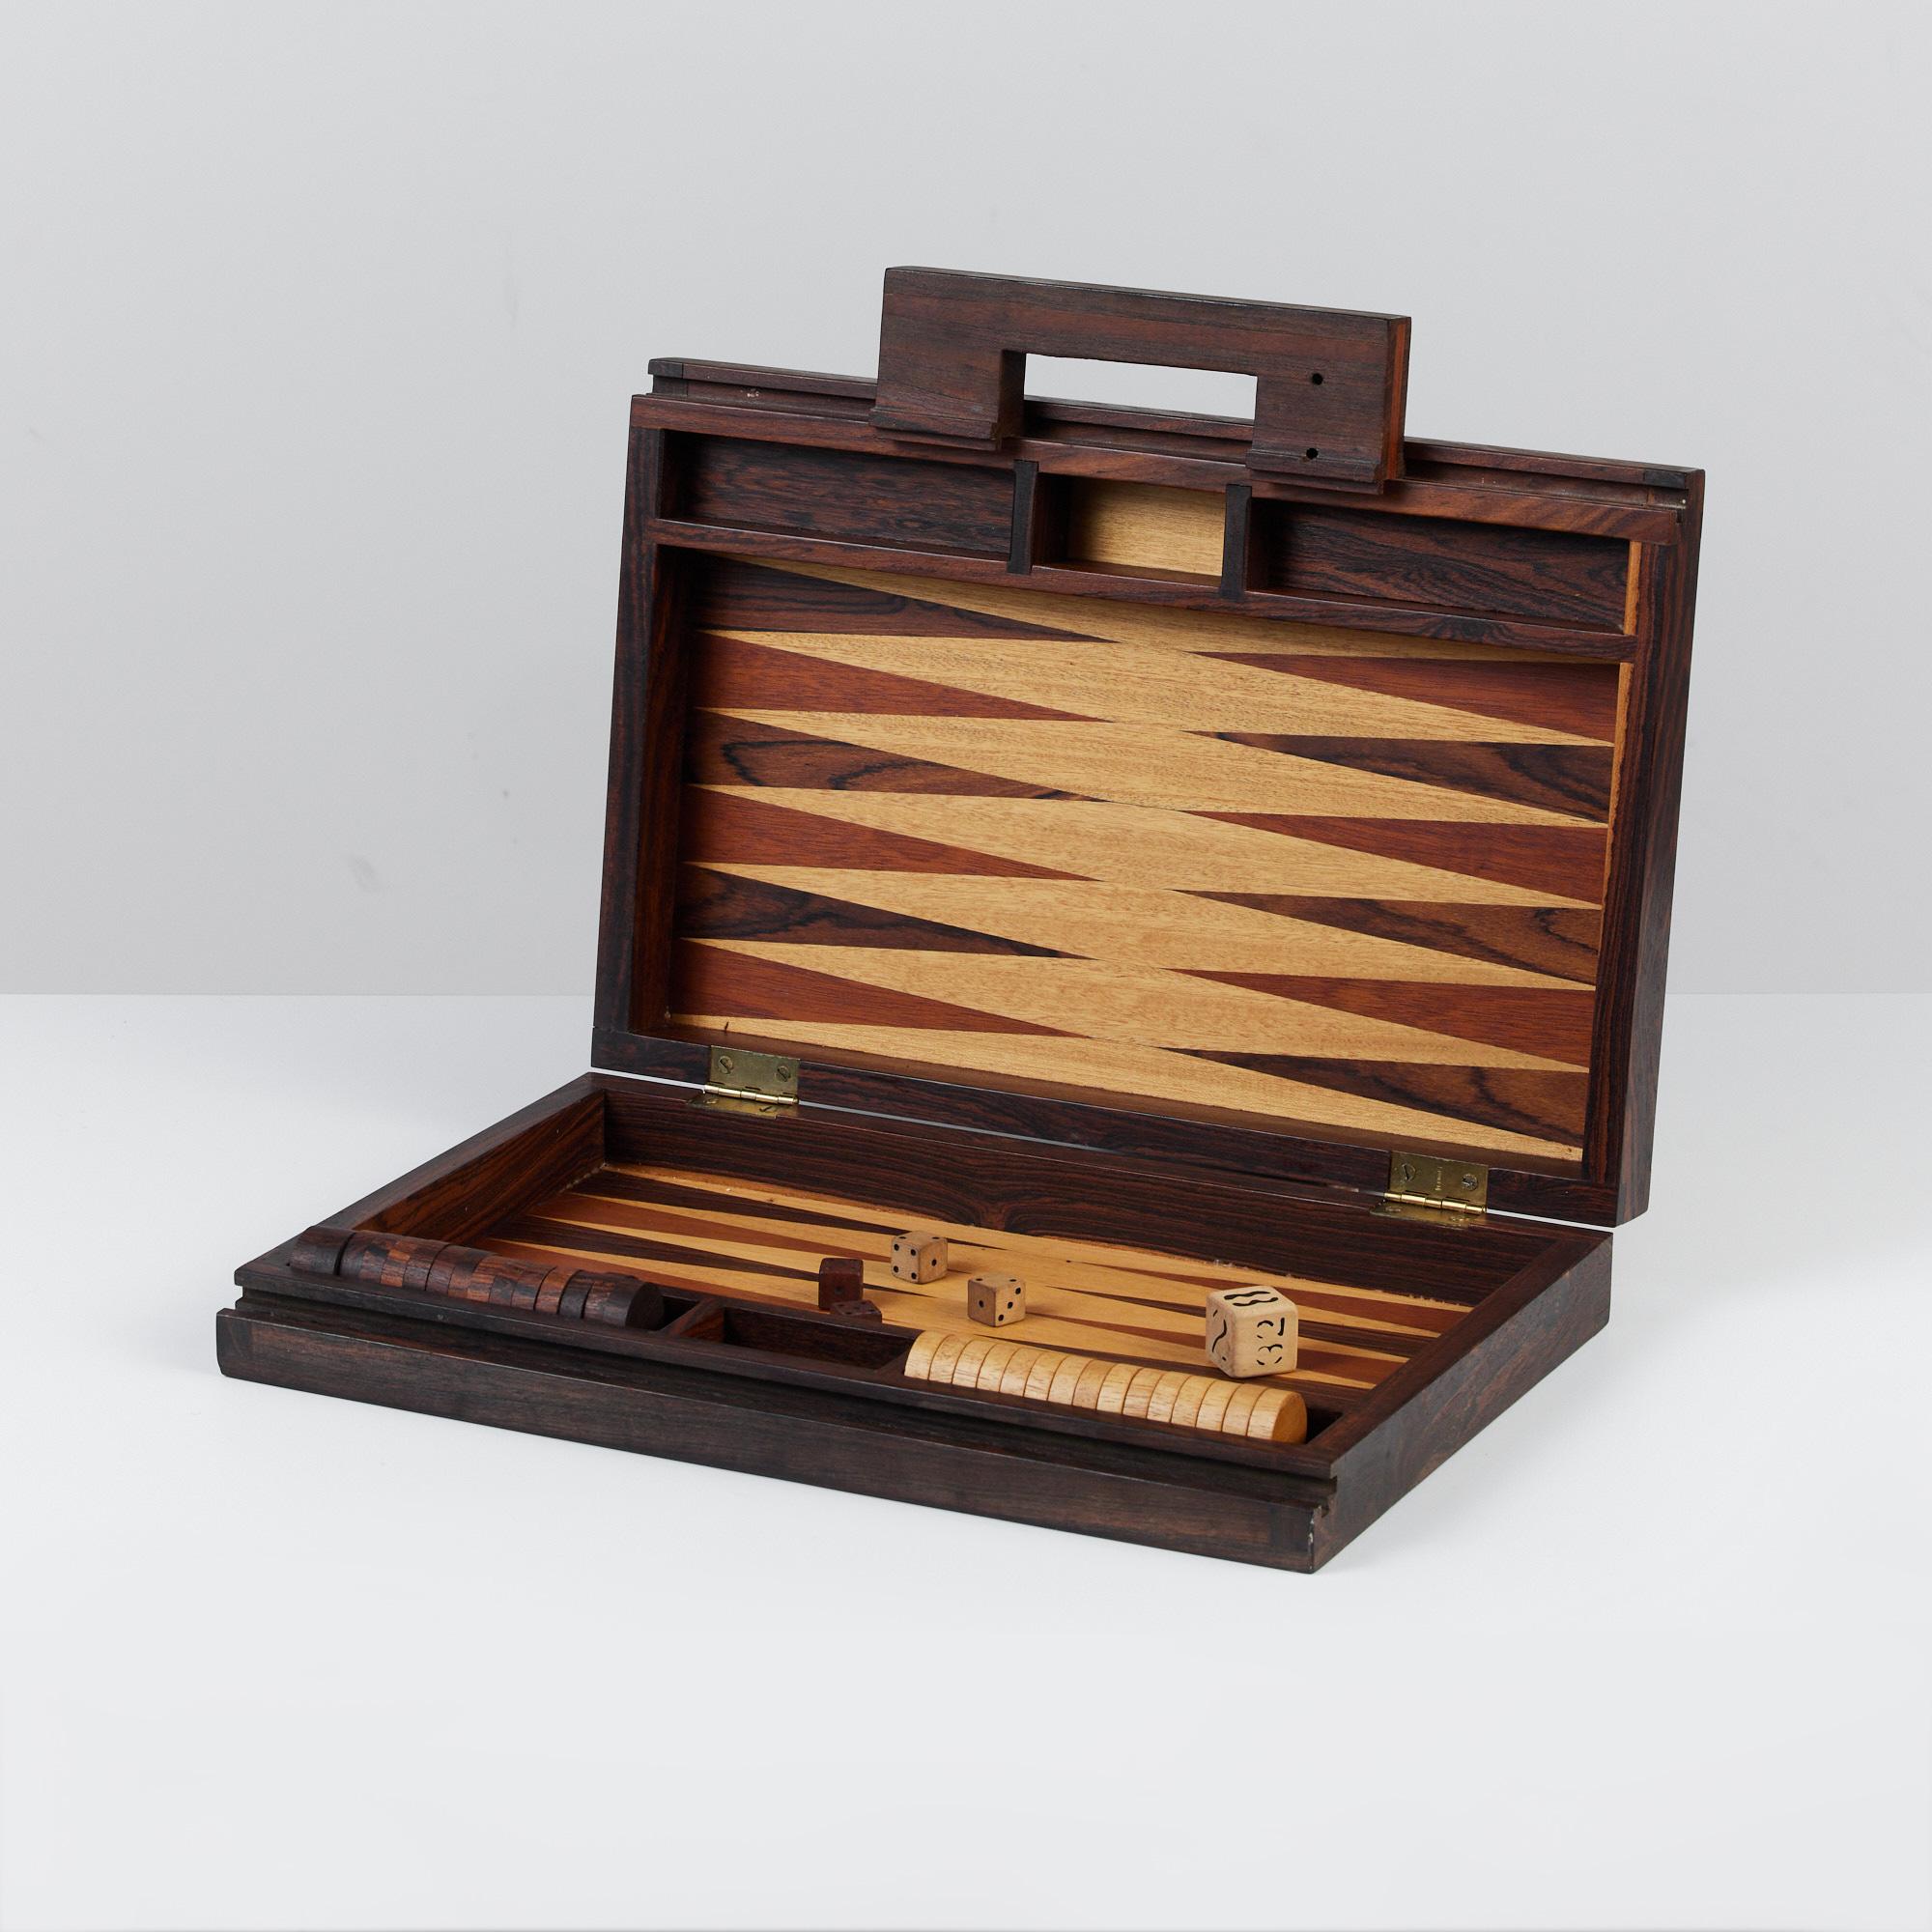 A modernist backgammon set by US-born, Mexico-based designer Don Shoemaker for his company Señal. This portable set includes the game board, which folds up into a carrying case, checkers, rolling dice, and doubling dice. Made from local hardwood